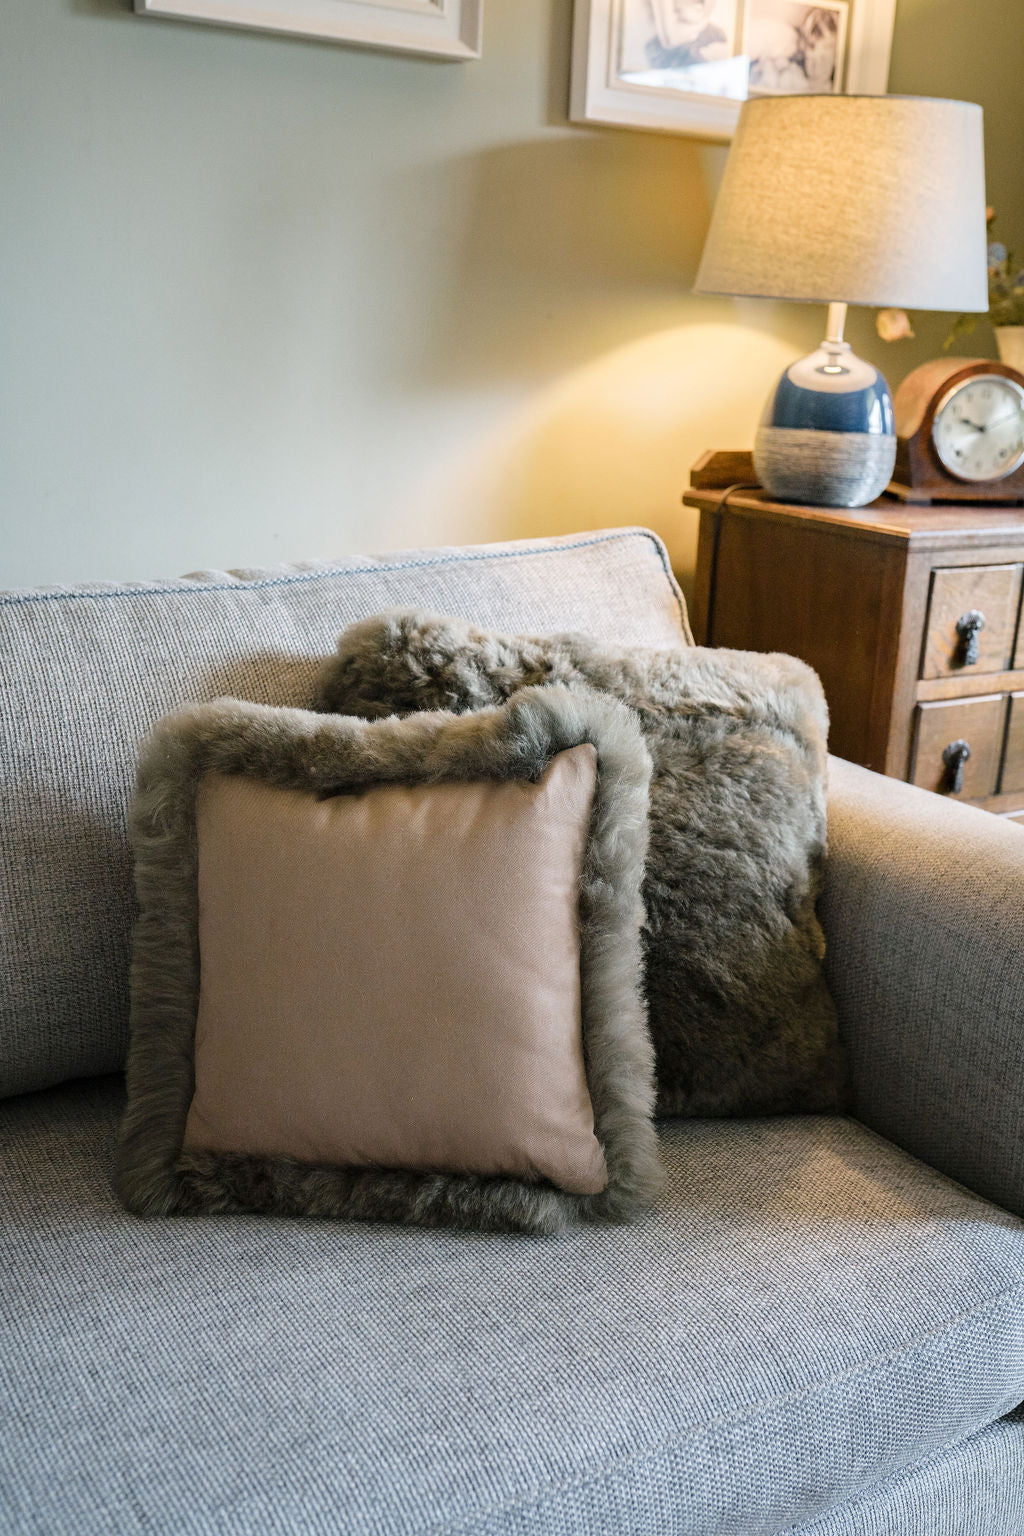 Luxury Icelandic Shorn Sheepskin Cushion with a Cotton Back in Olive